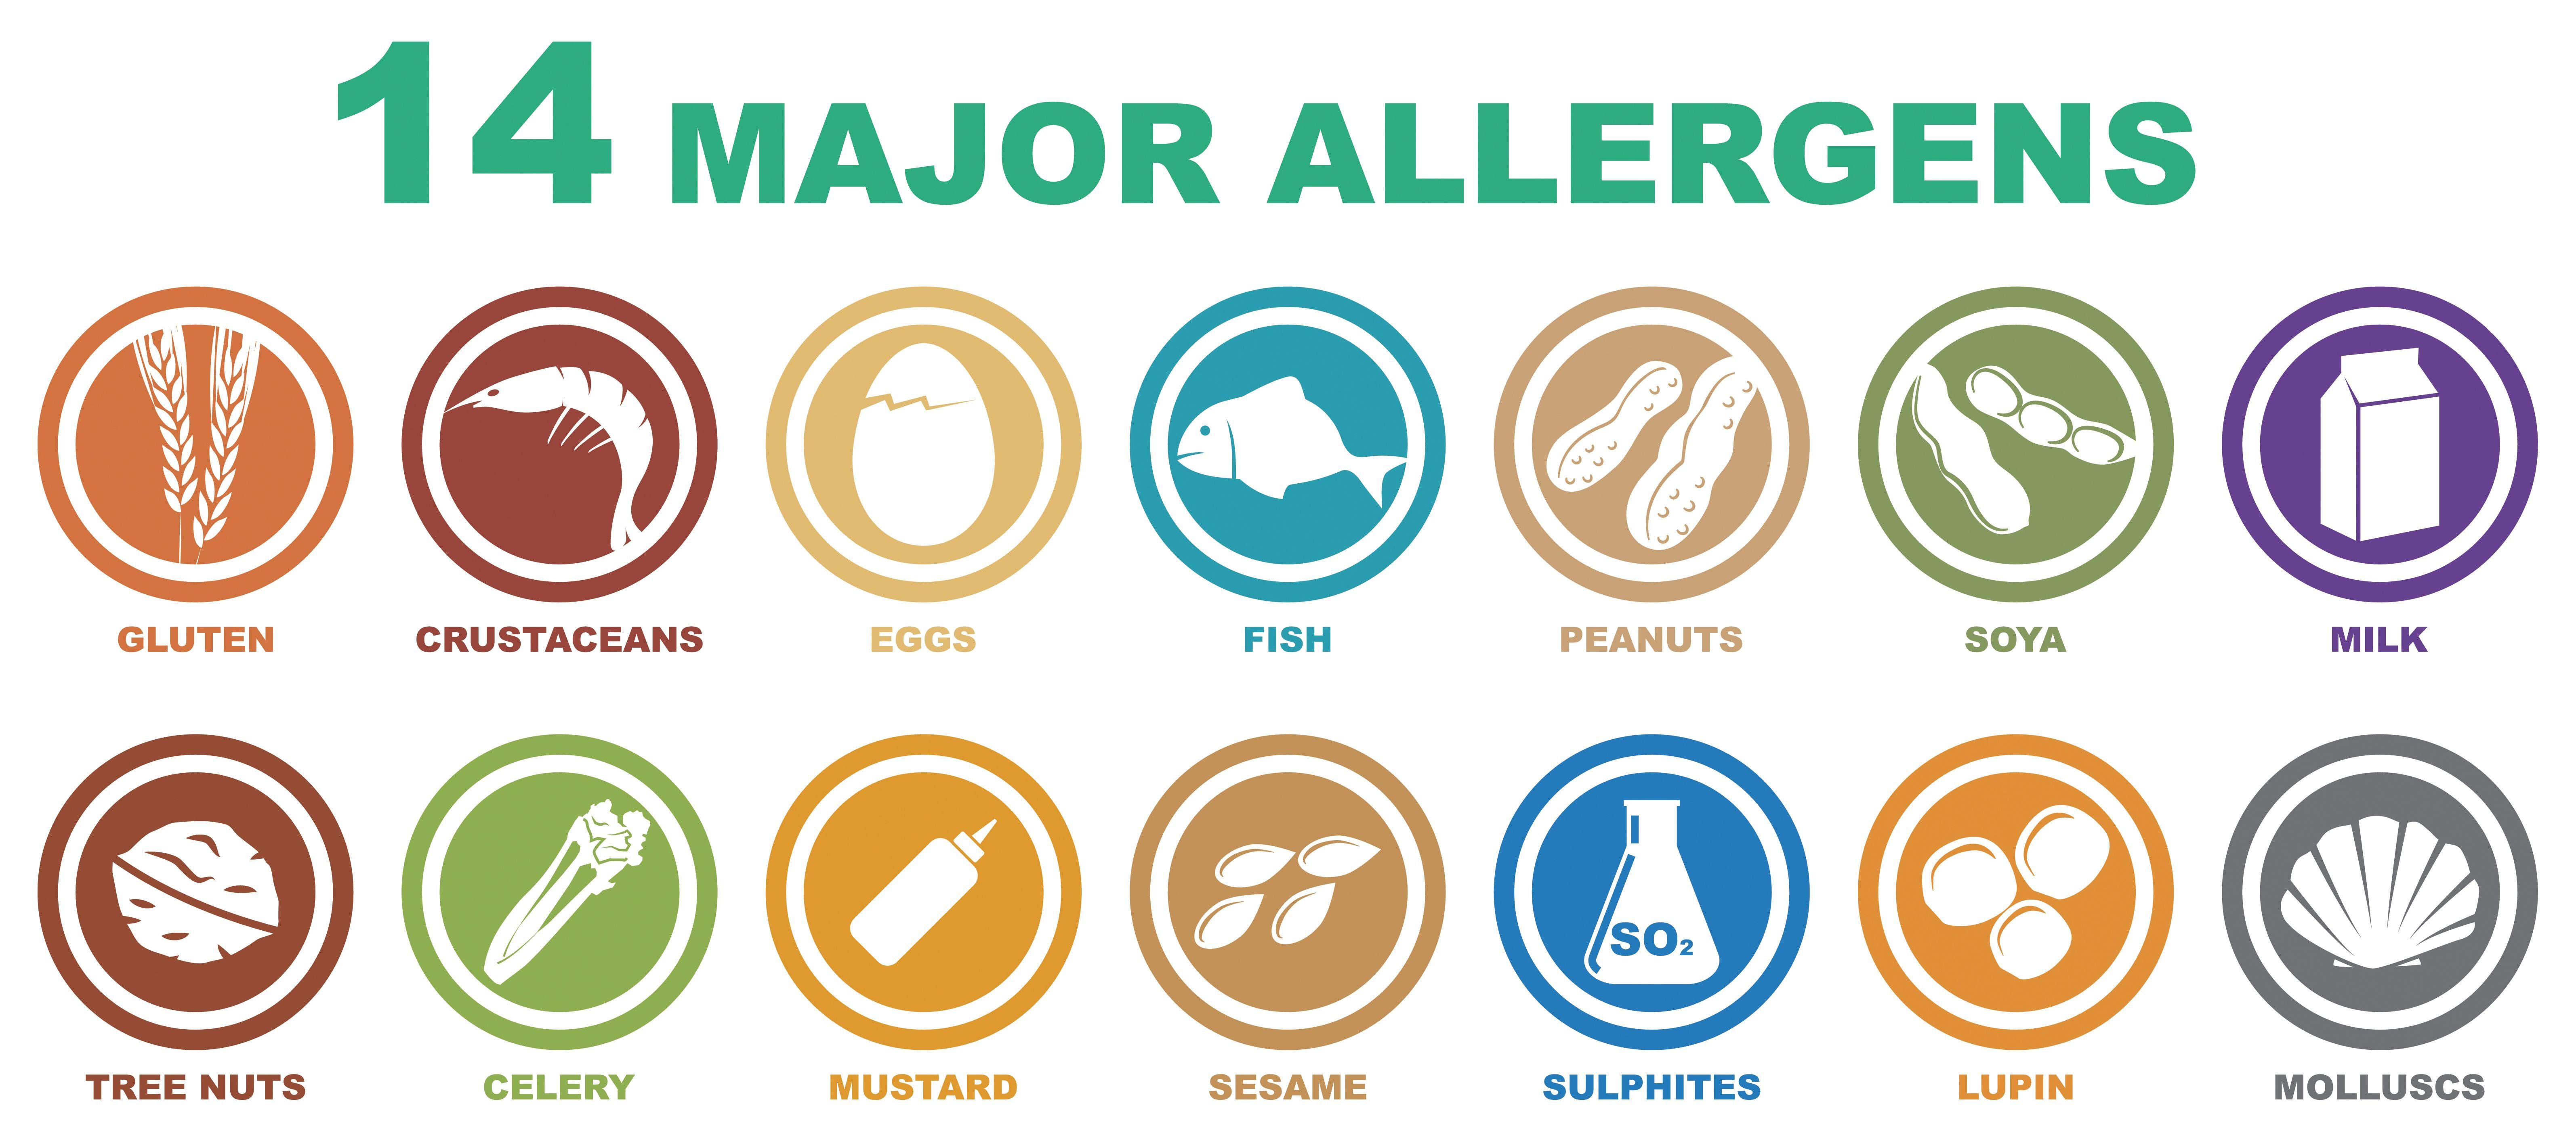 Allergen Logo - Allergen Free From Claims In A Plant Based World 24 June 2020